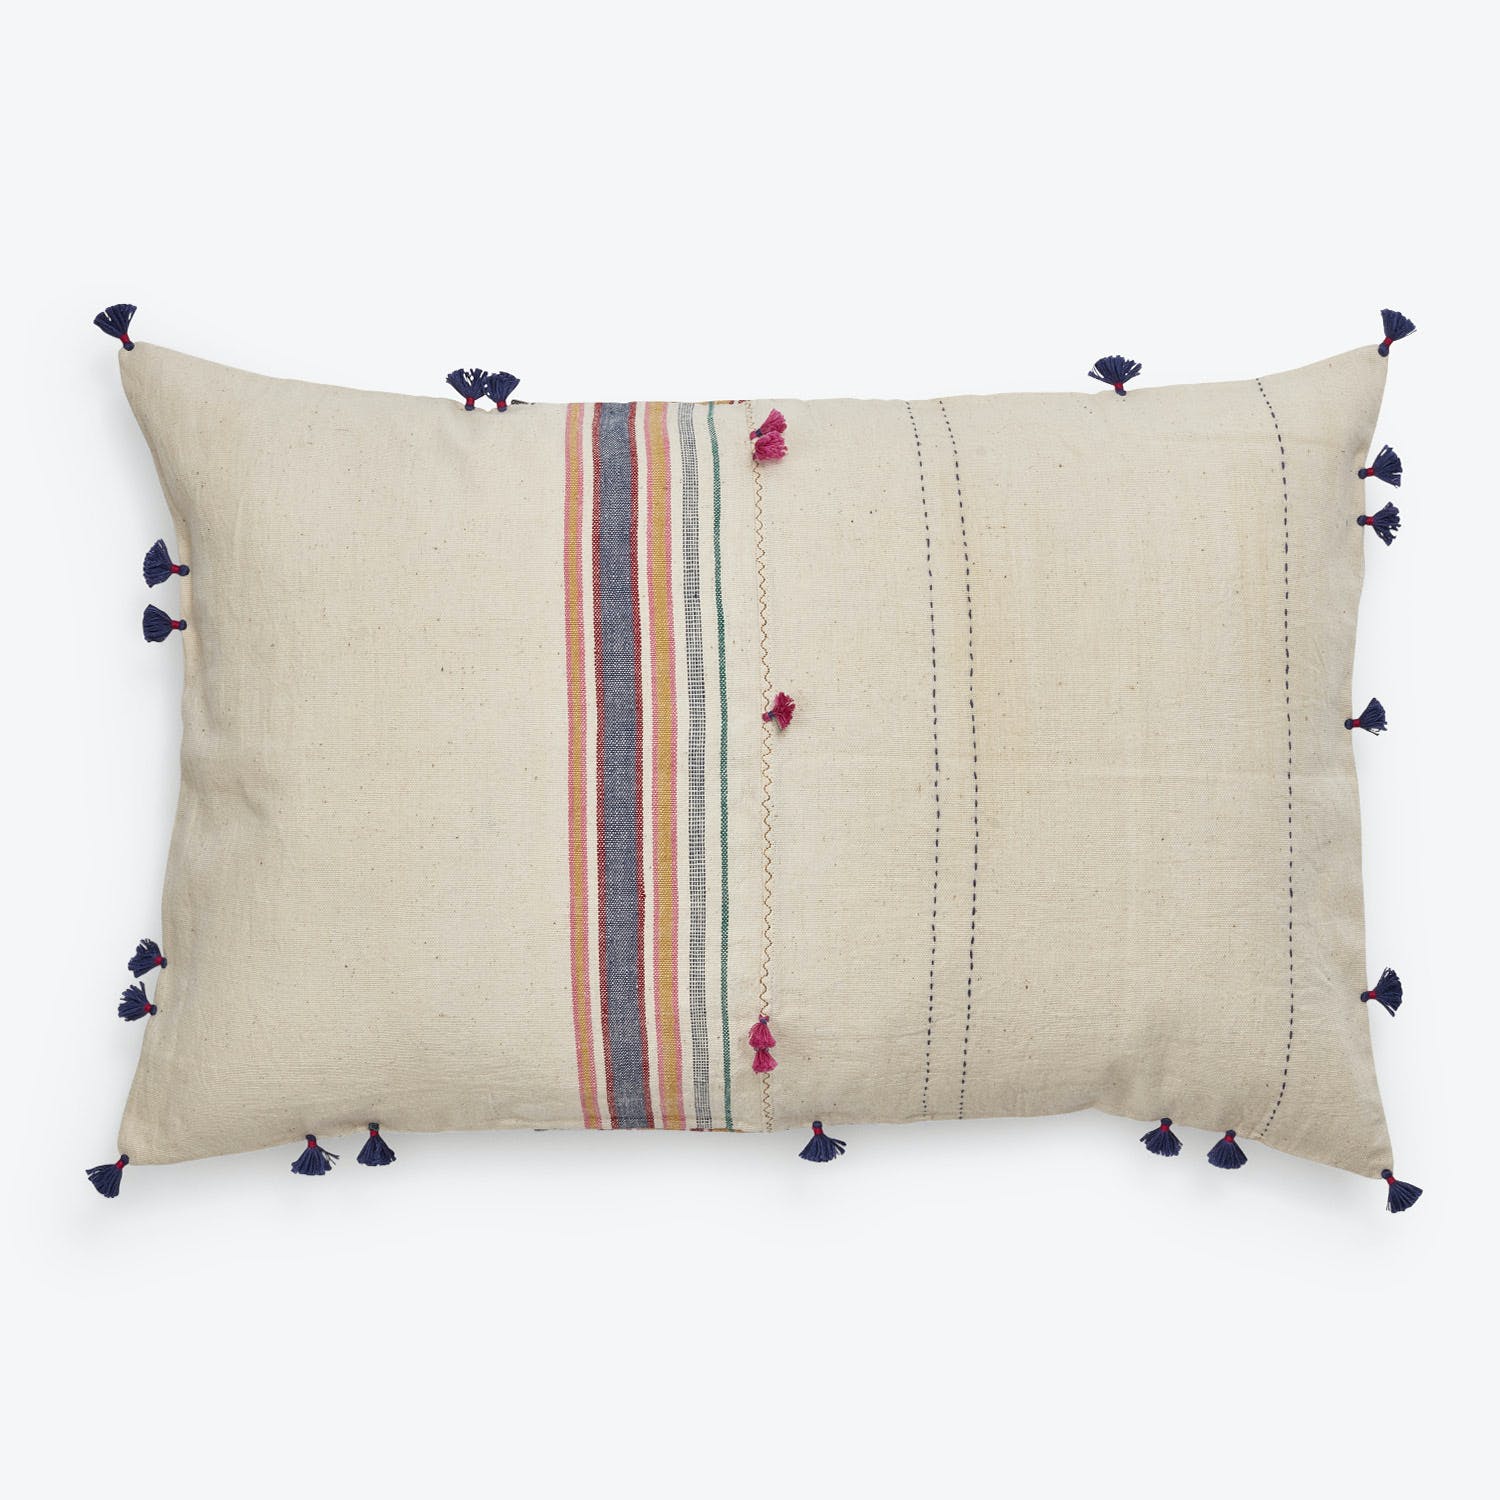 Rectangular decorative pillow with colorful vertical stripe pattern and tassel accents.